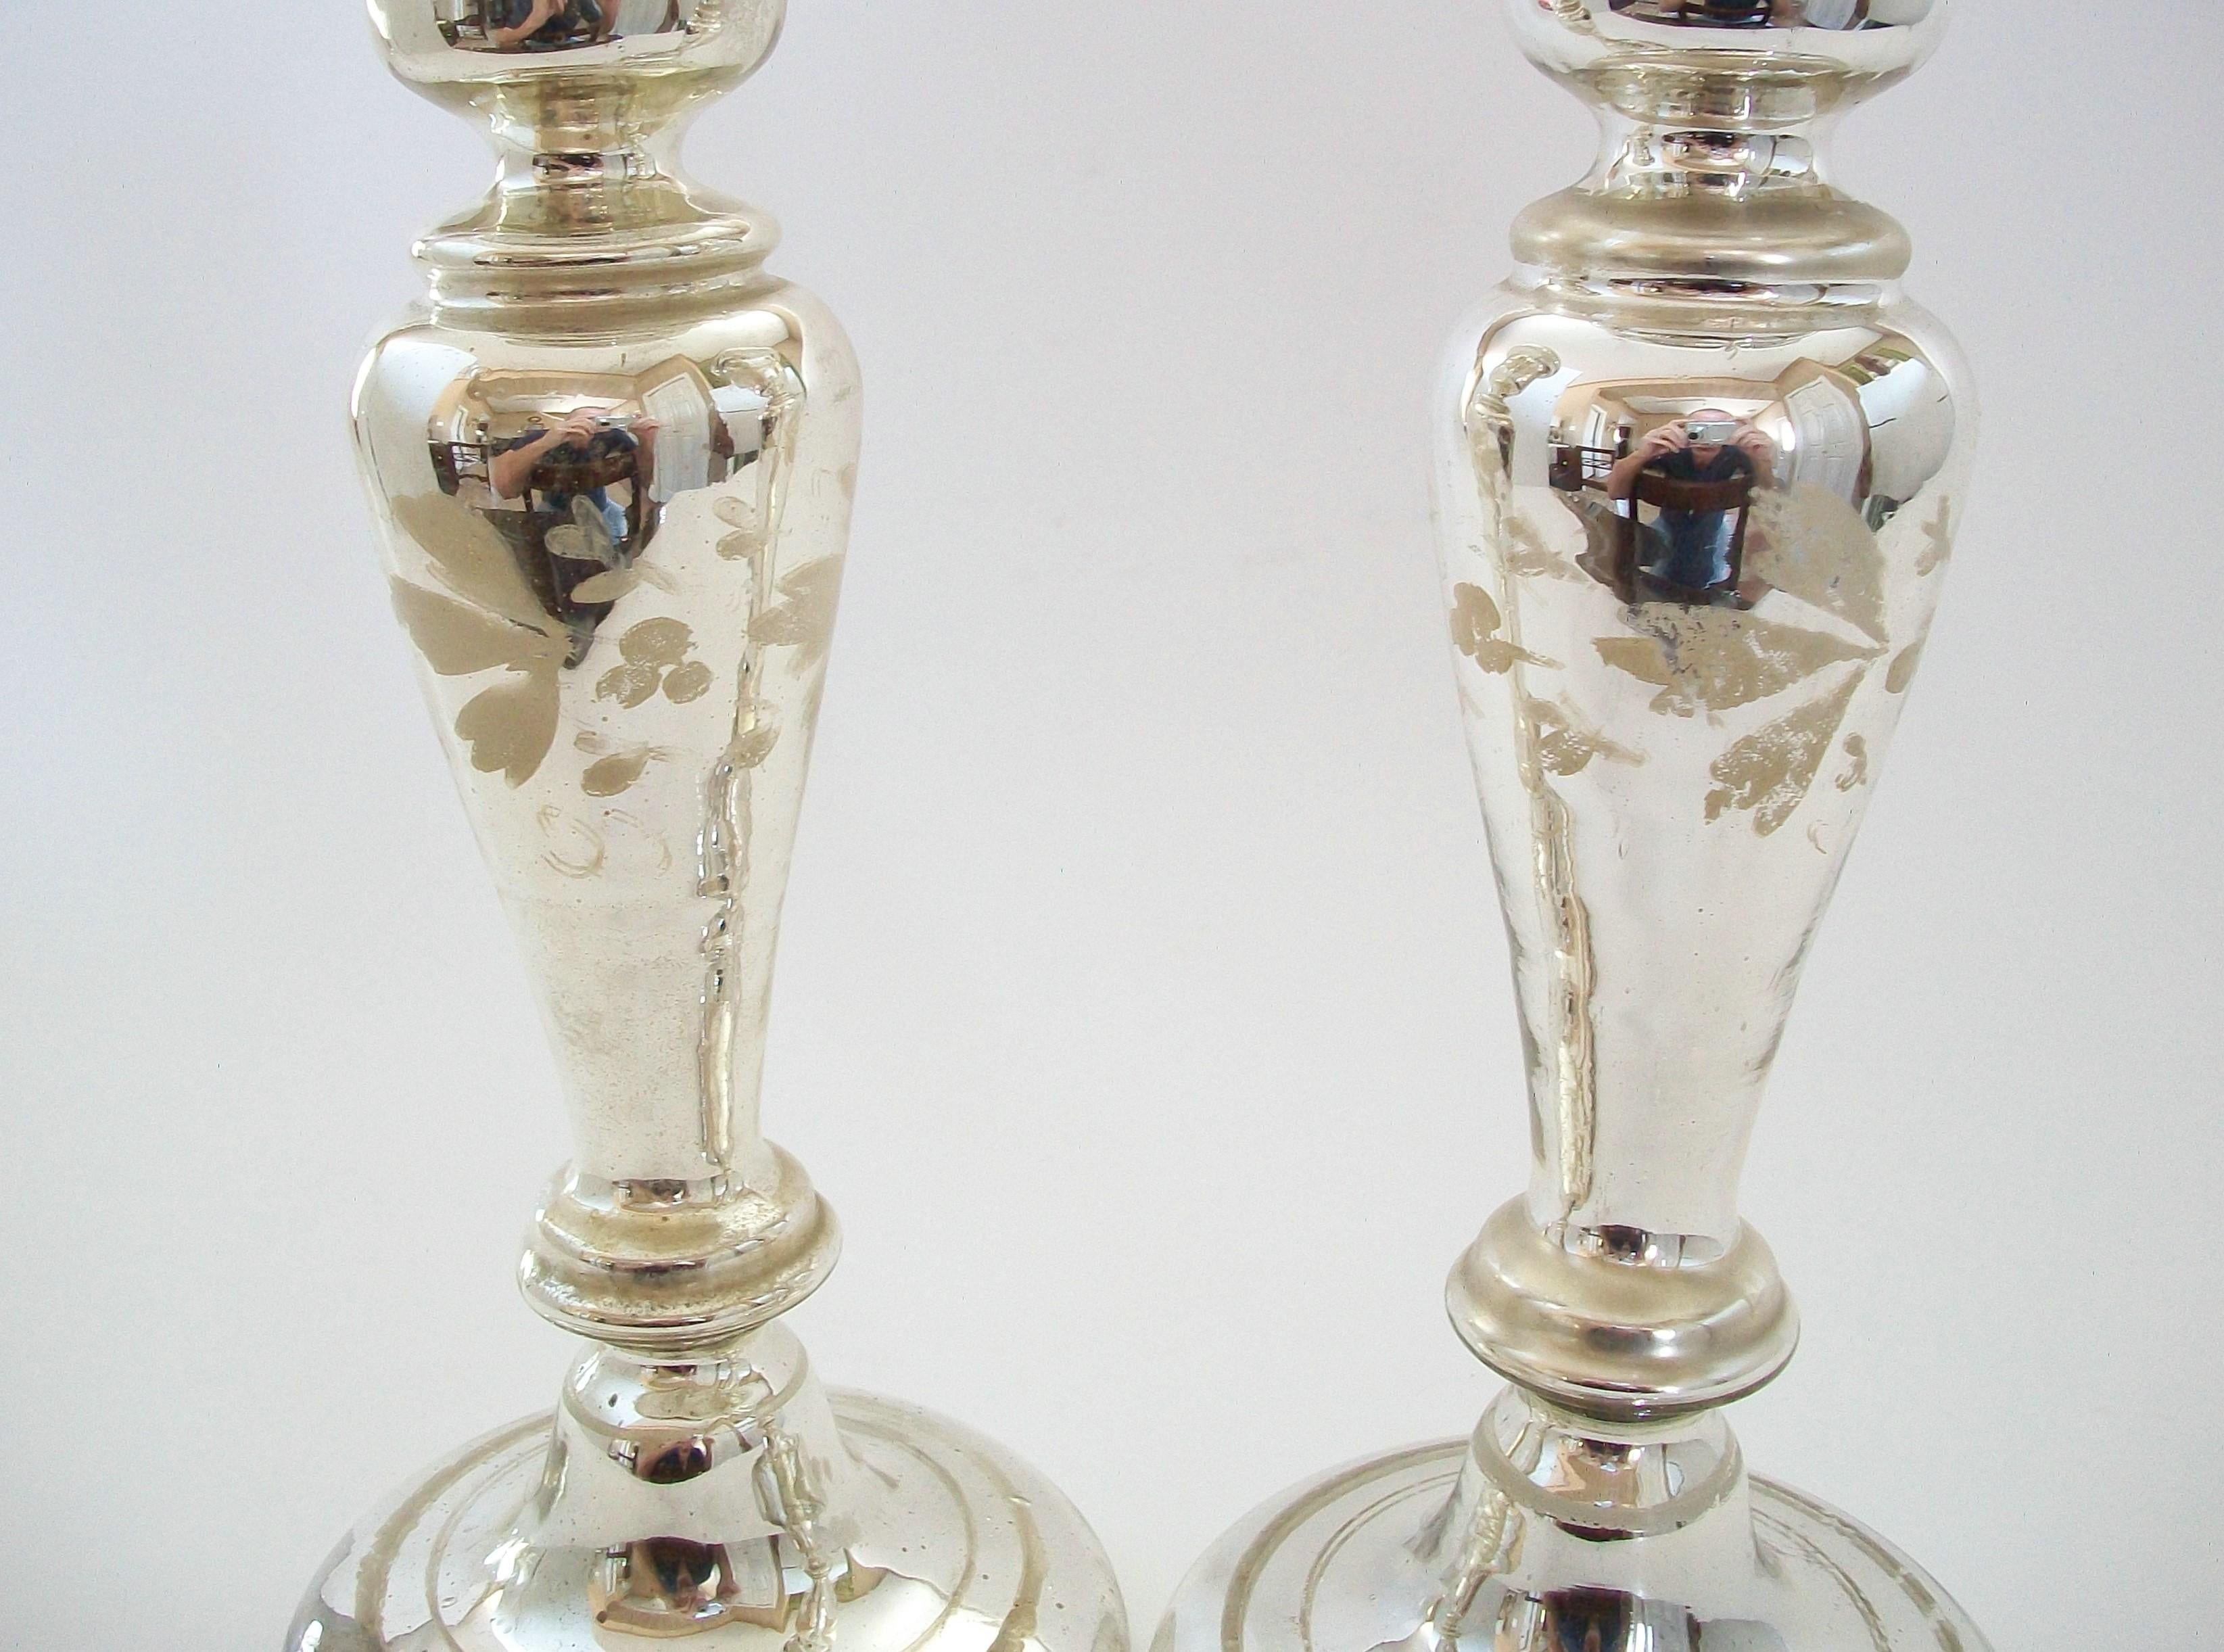 Antique Pair of White Painted Mercury Glass Candlesticks - France - Circa 1880 For Sale 7